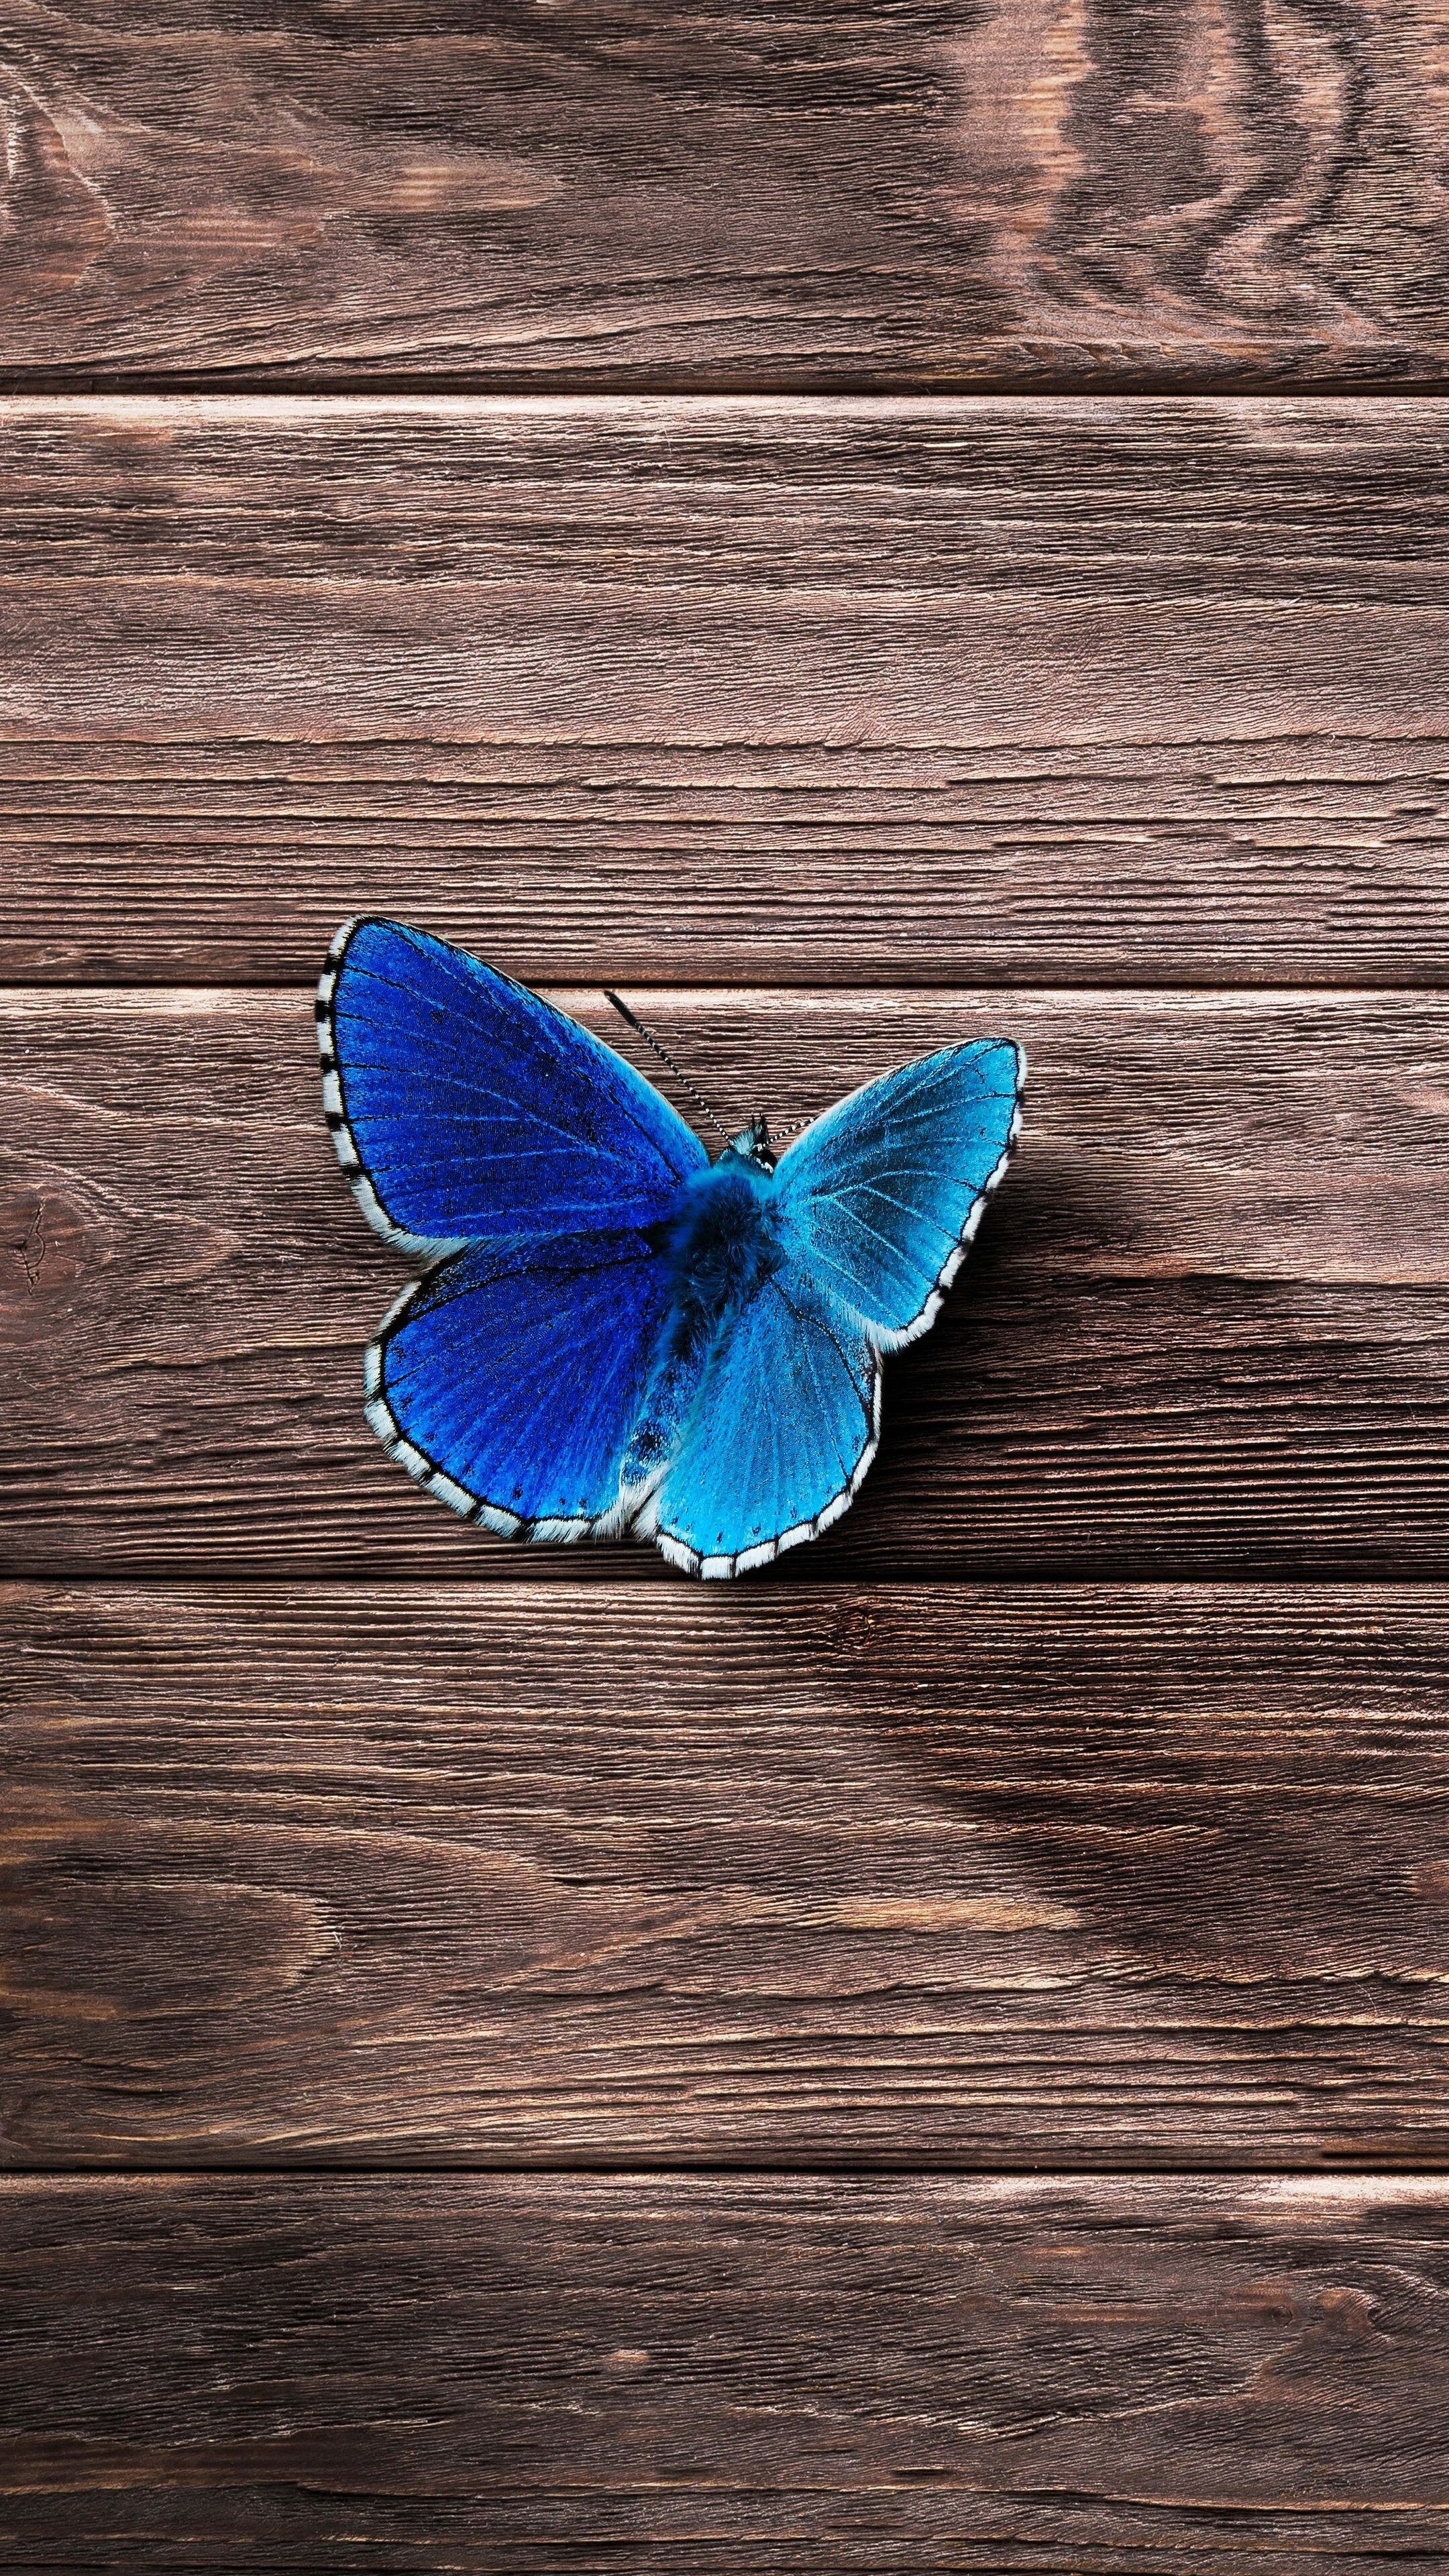 Butterfly: Butterflies have a four-stage life cycle, as like most insects they undergo complete metamorphosis. 2160x3840 4K Background.